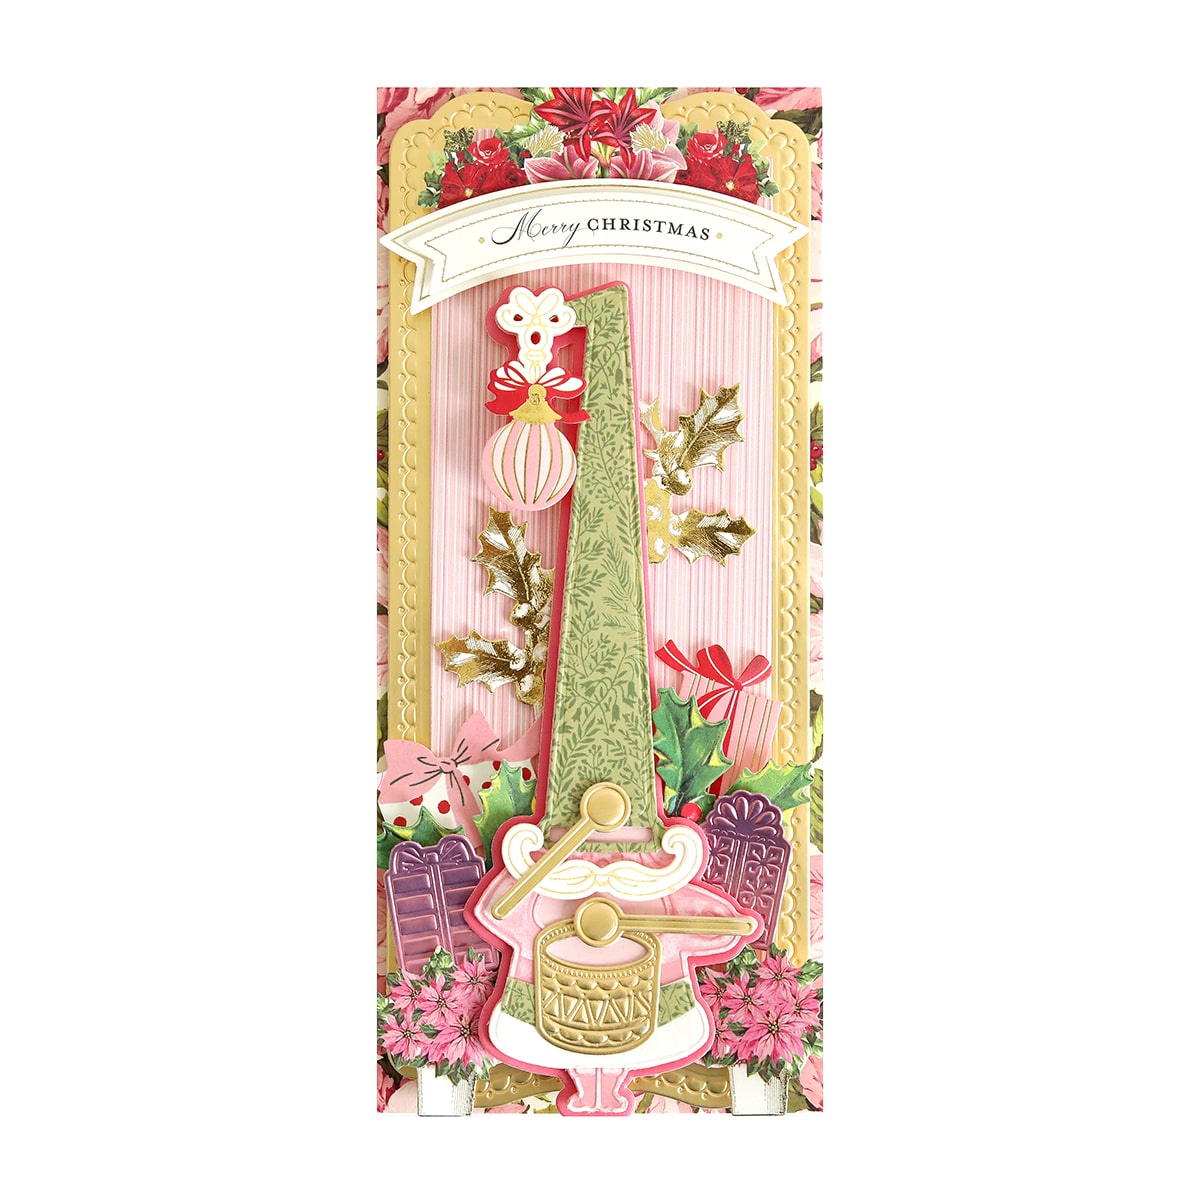 A card with a pink and gold design on it.